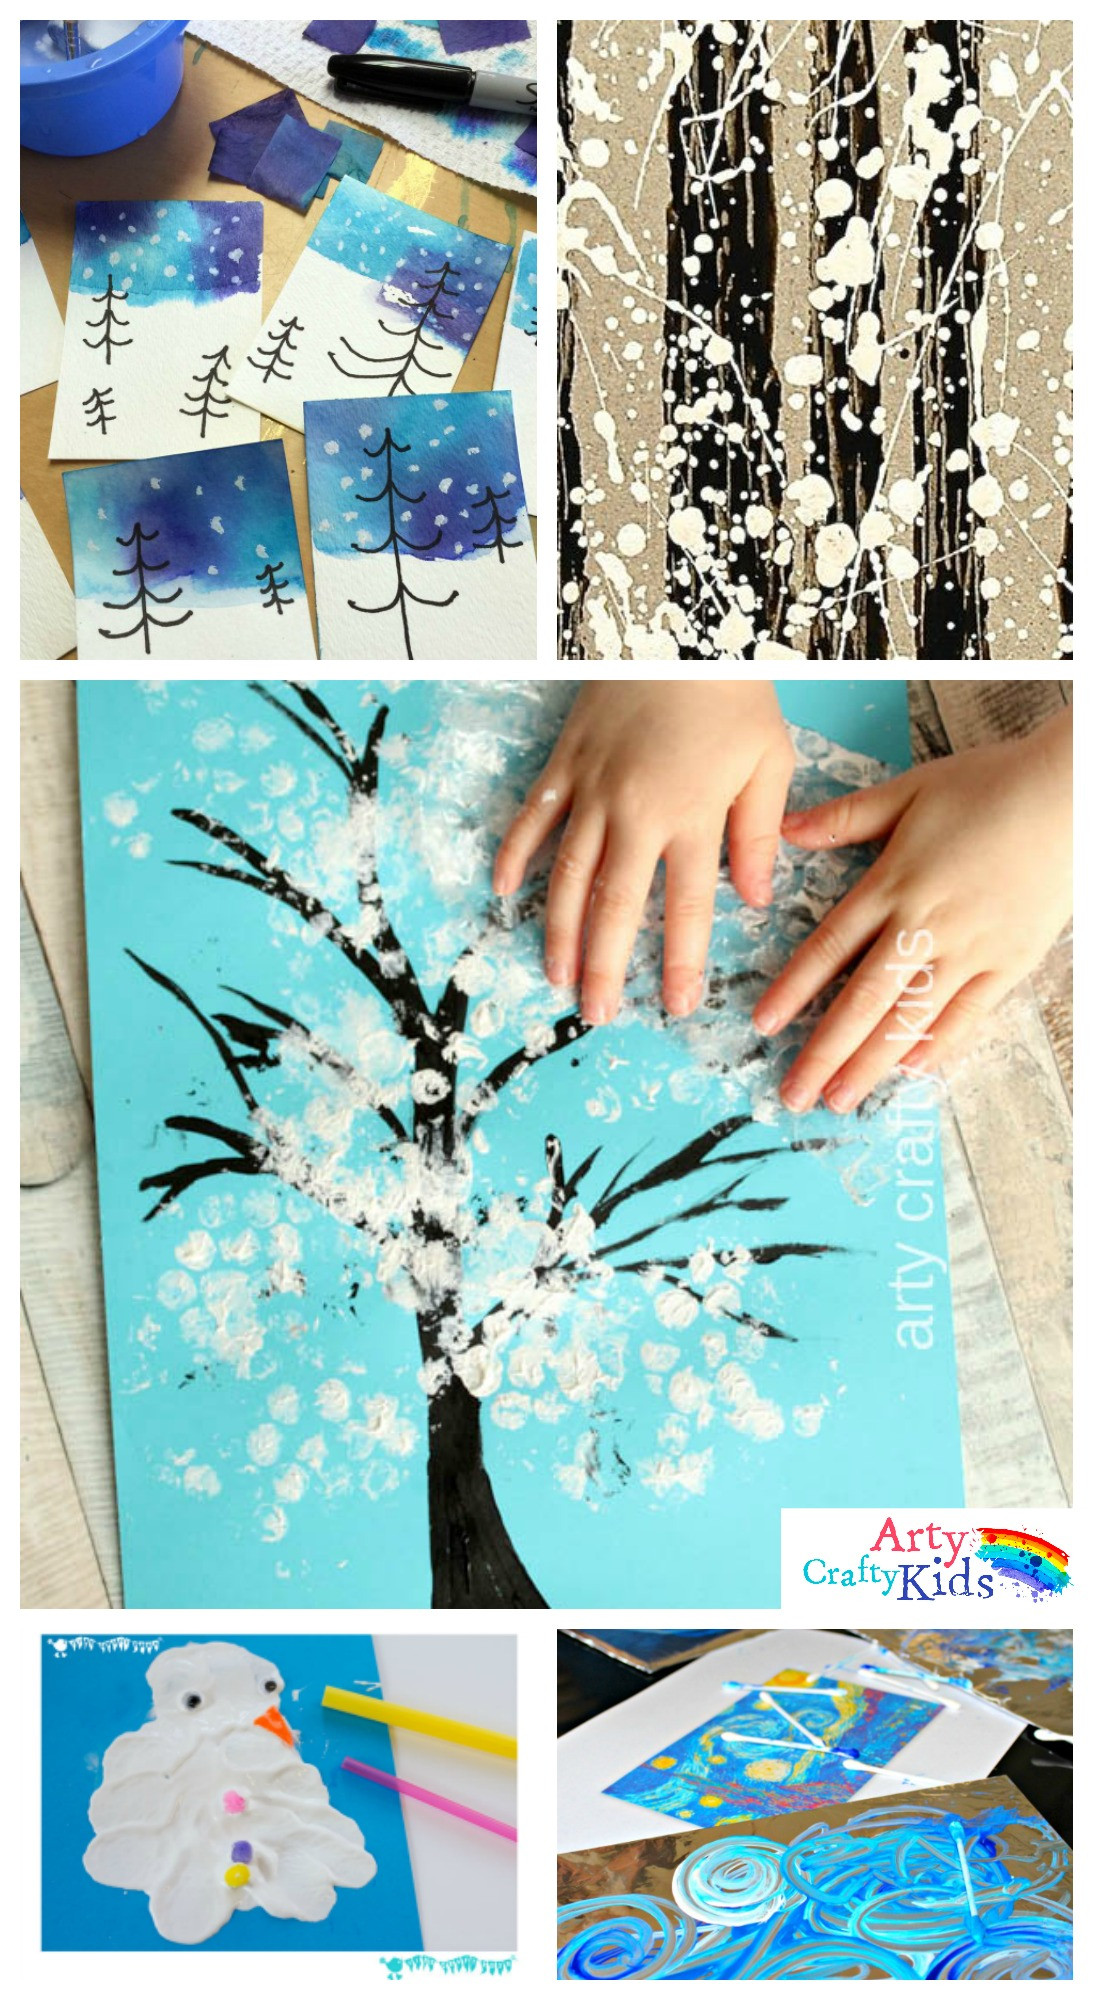 Toddler Art And Craft Projects
 14 Wonderful Winter Art Projects for Kids Arty Crafty Kids